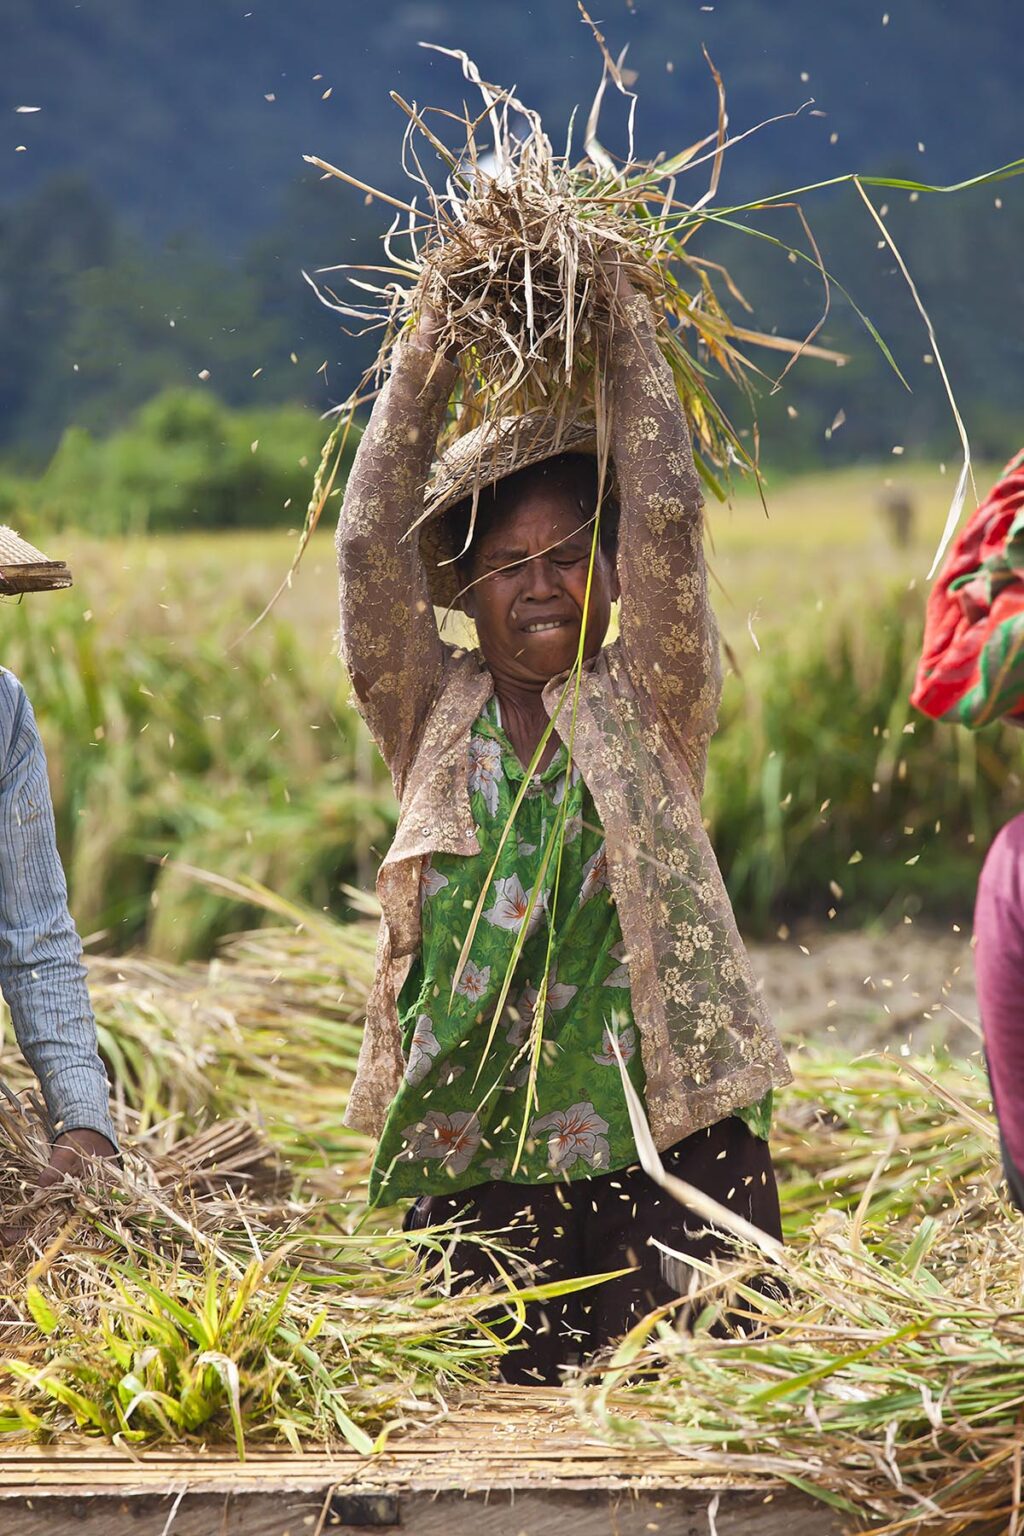 RICE is harvested and threshed in the fertile valleys along SIDEMAN ROAD - BALI, INDONESIA